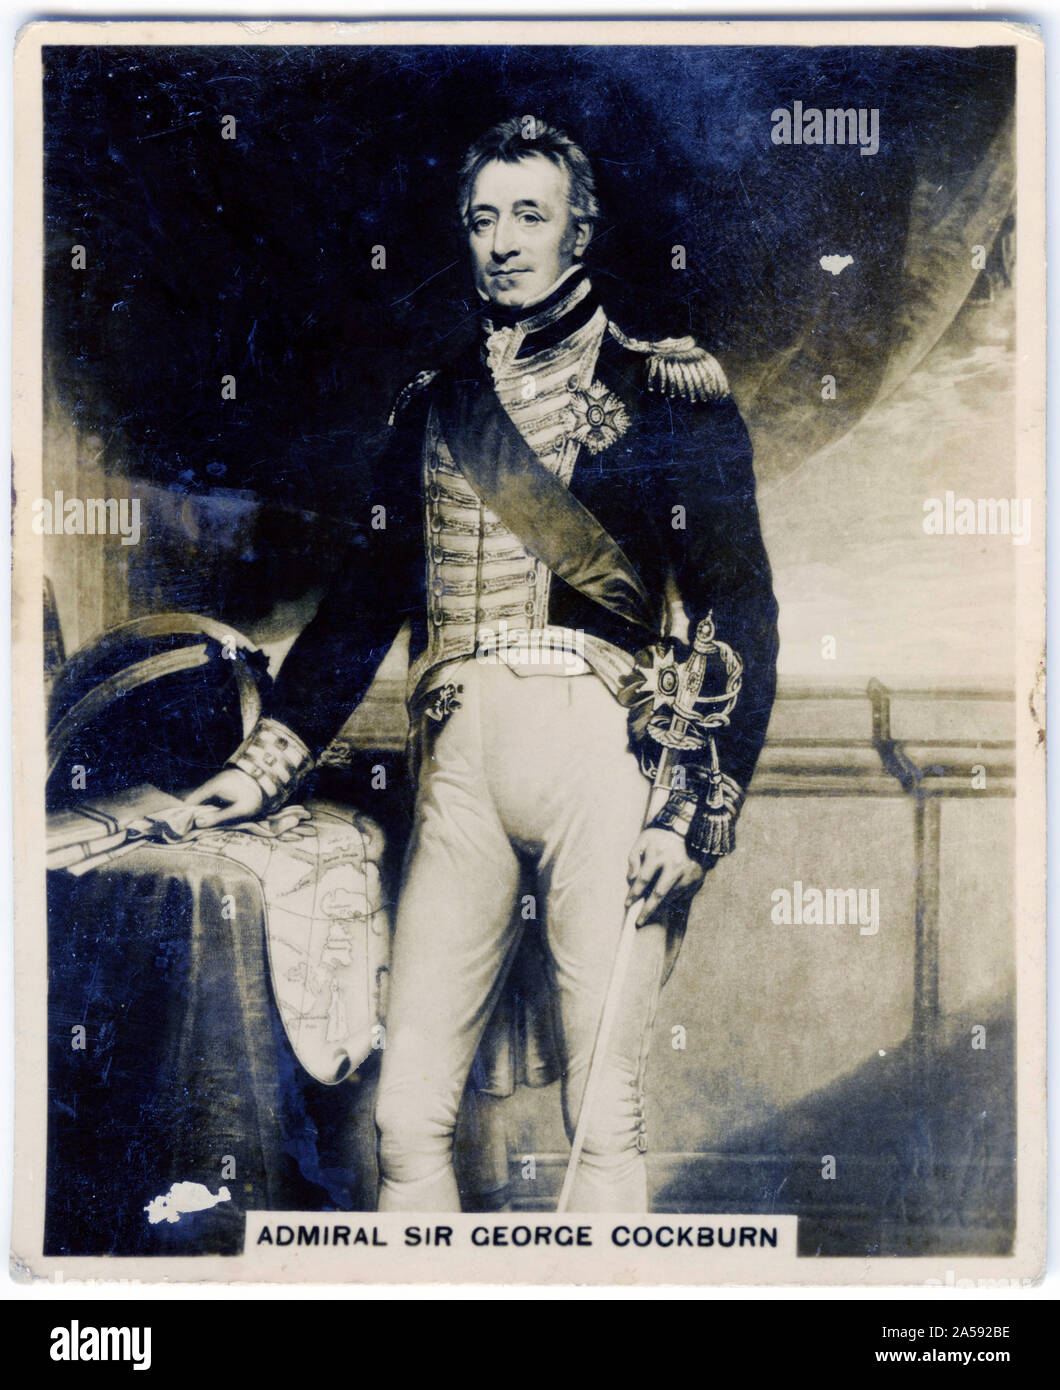 Cigarette card portrait of Admiral of the Fleet Sir George Cockburn, 10th Baronet, GCB, PC, FRS (1772 – 1853). As a captain he was present at the Battle of Cape St Vincent in February 1797 during the French Revolutionary Wars and commanded the naval support at the reduction of Martinique in February 1809 during the Napoleonic Wars. Stock Photo